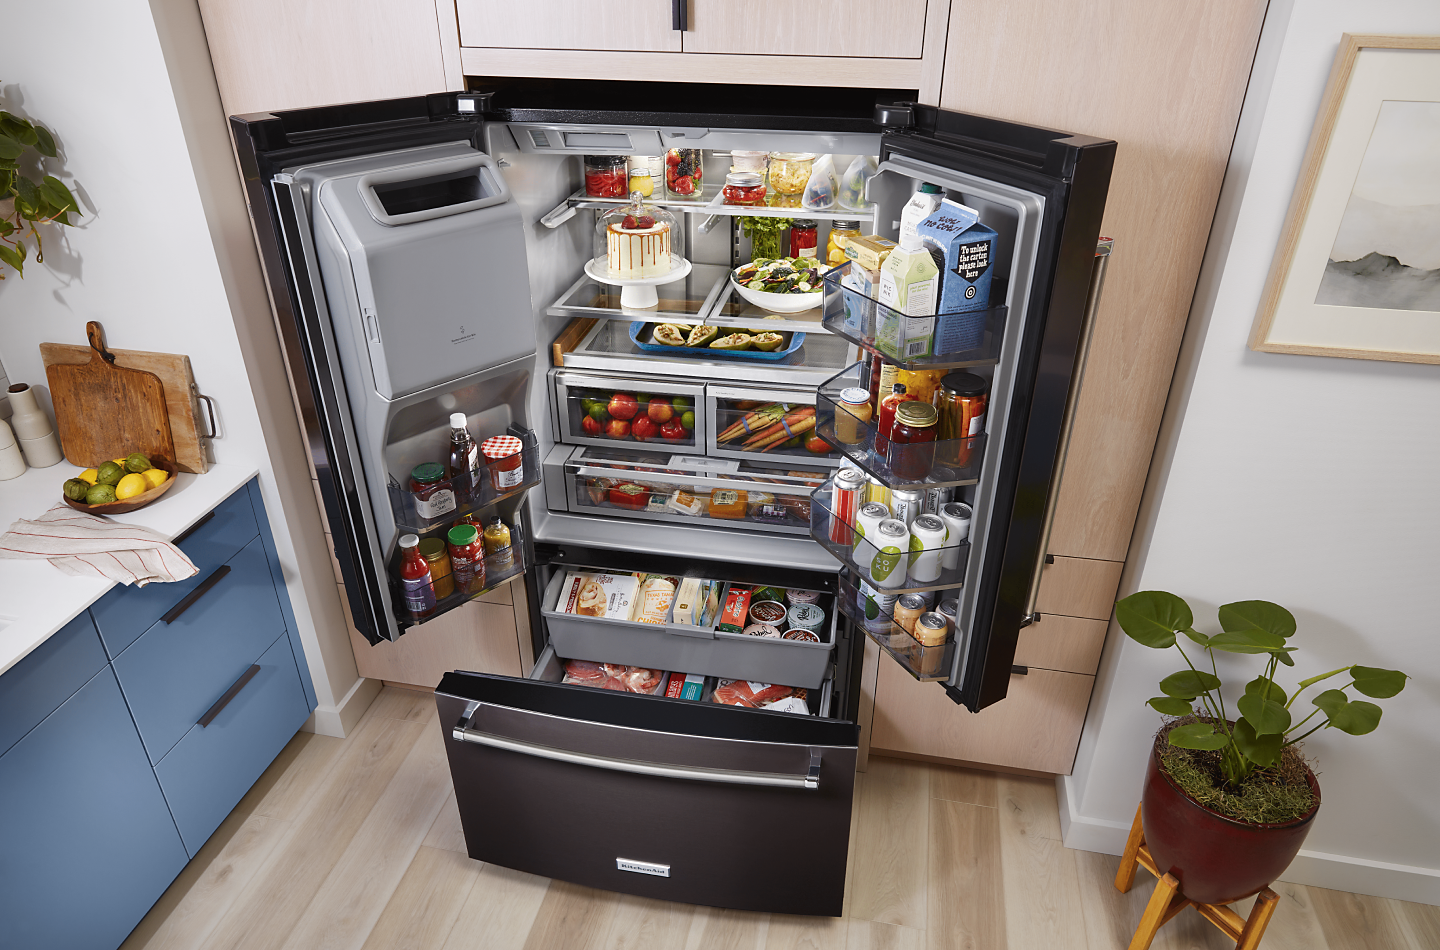 A fully-stocked French Door refrigerator from KitchenAid brand.